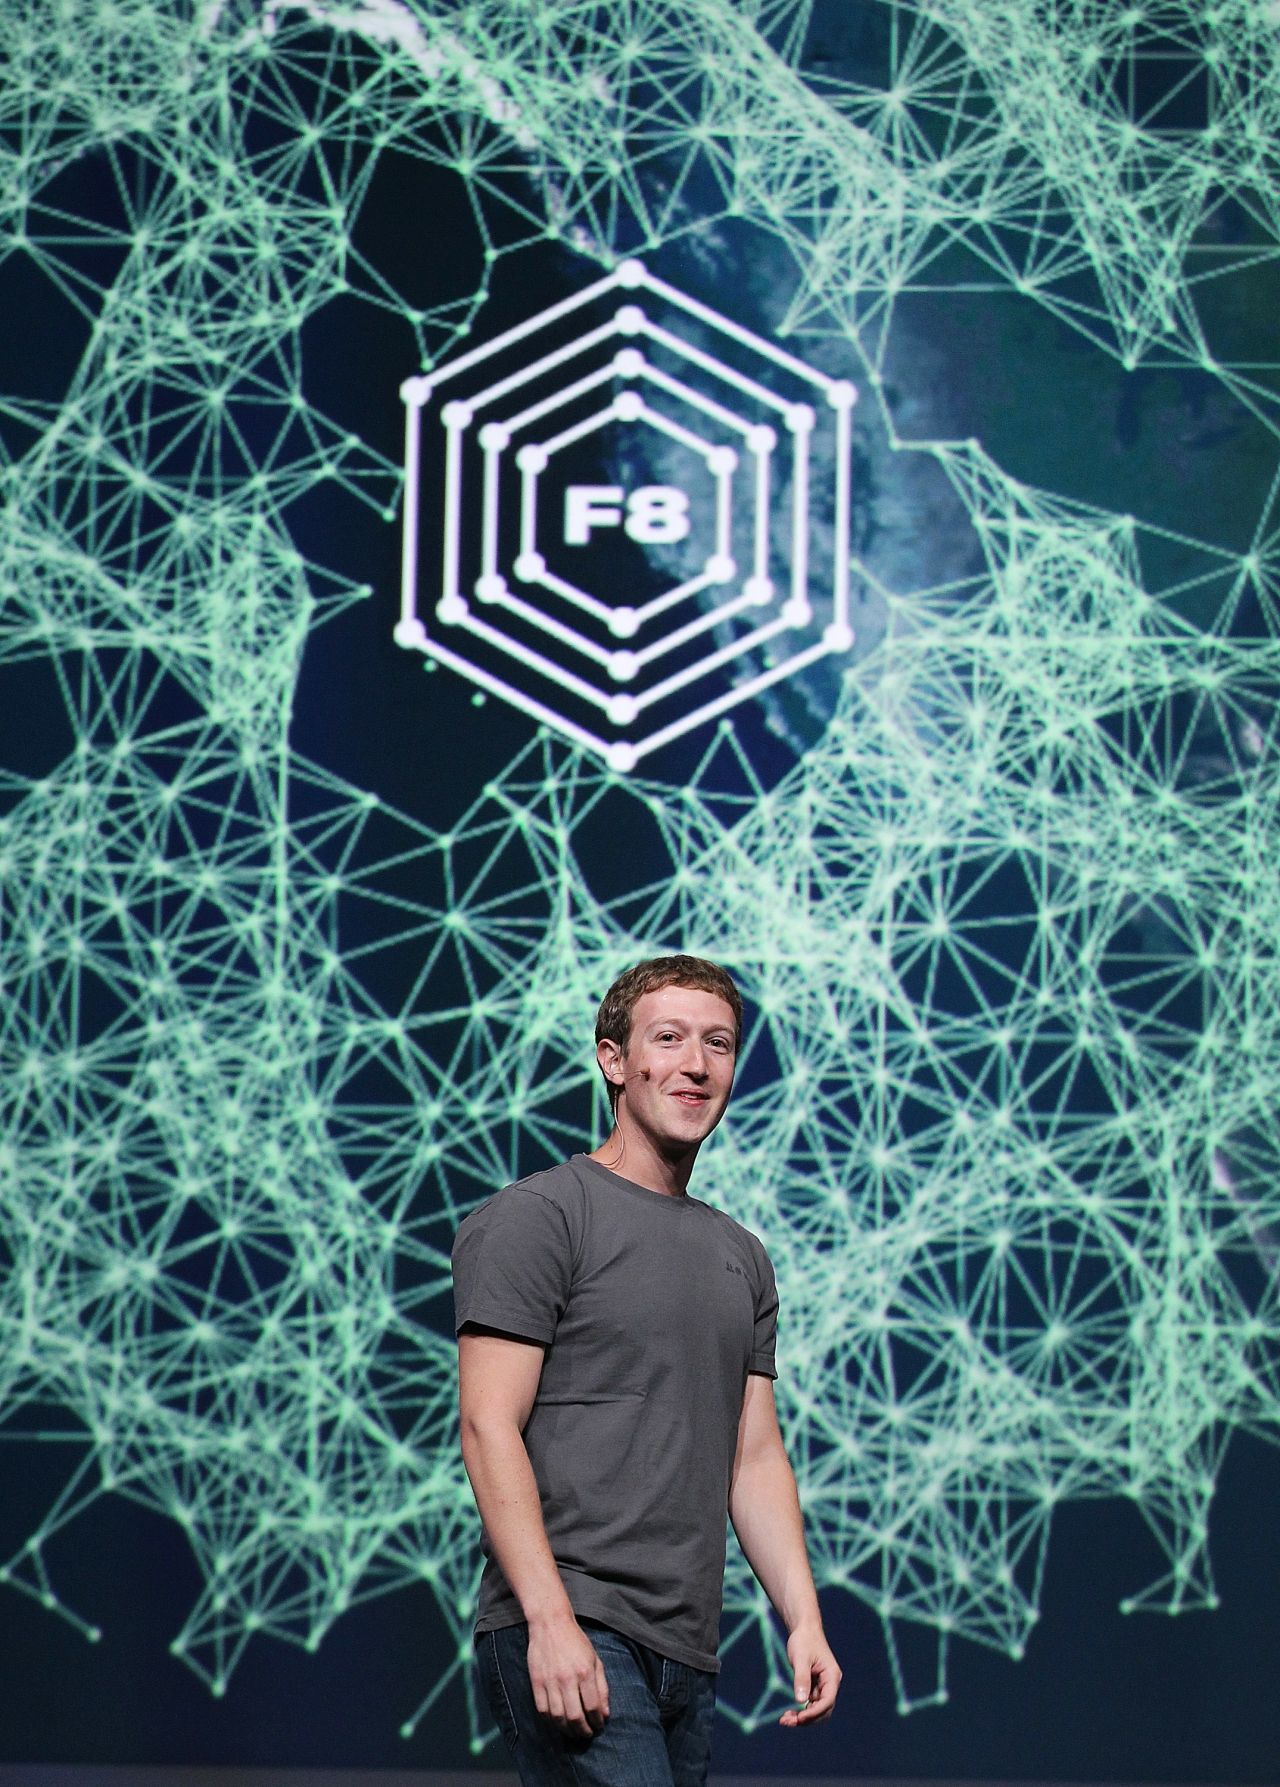 Mark Zuckerberg has announced an ambitious plan to connect 5 billion people to the Internet. But he's not the only tech titan with big ideas.